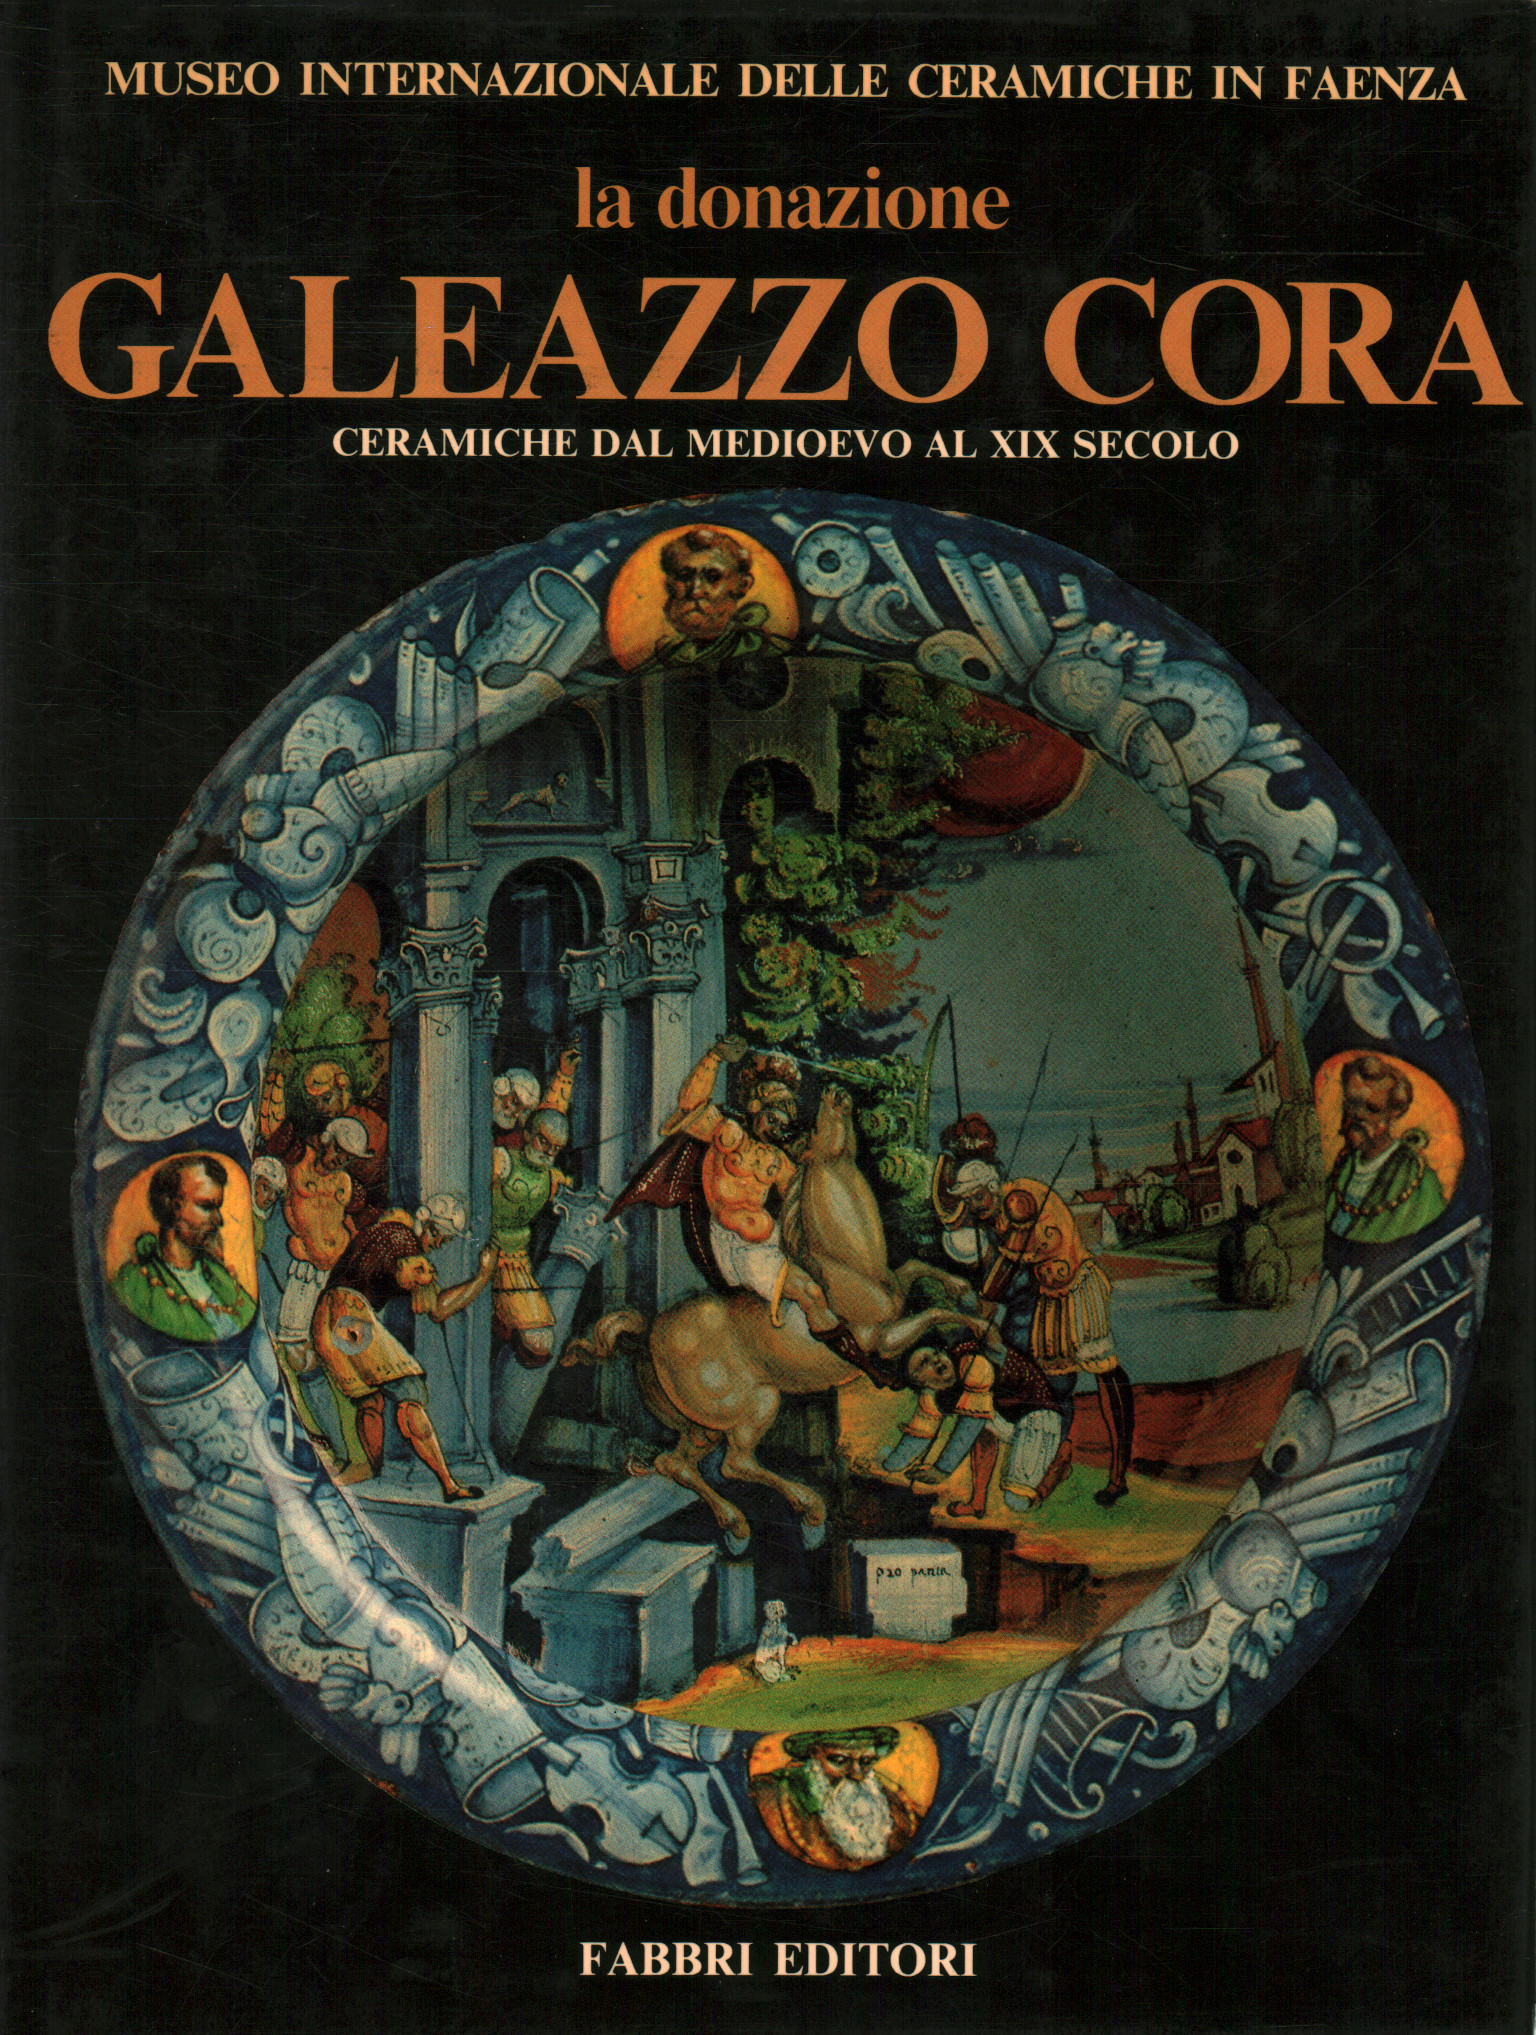 The Galeazzo Cora donation. Pottery from